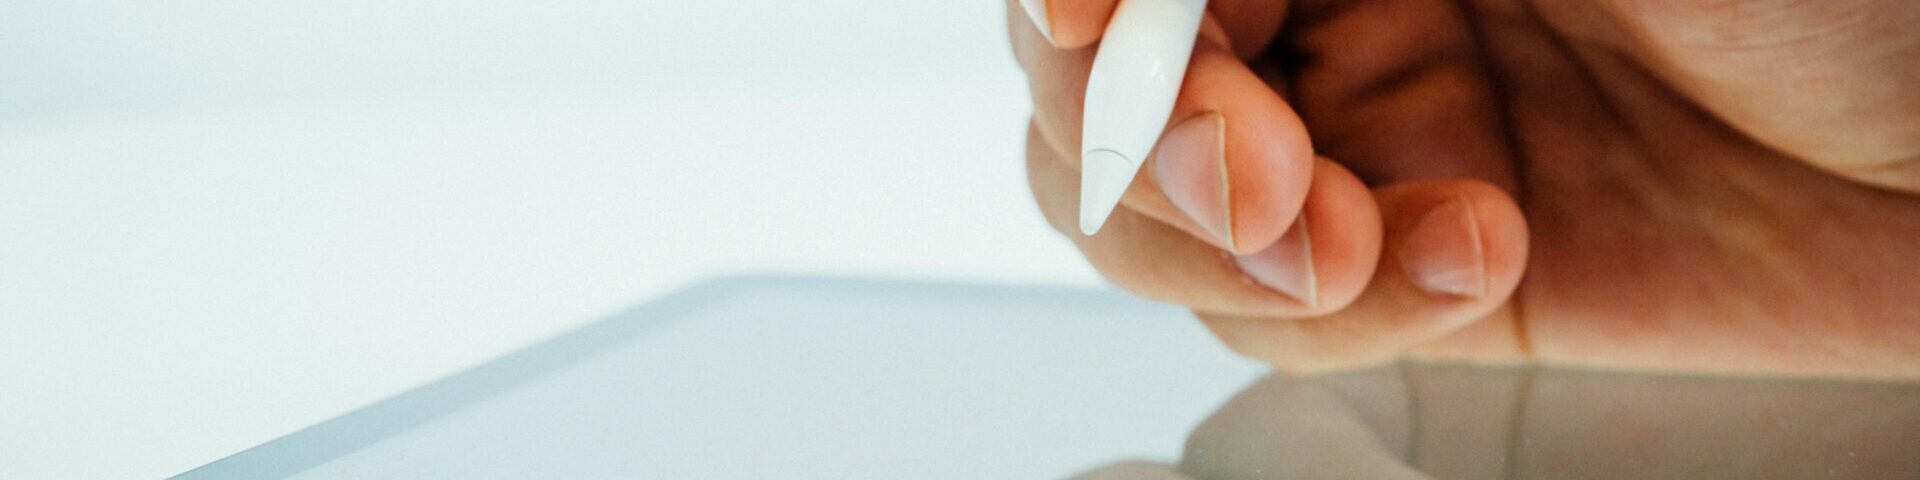 close up image of a hand using a stylus pen on a digital tablet.